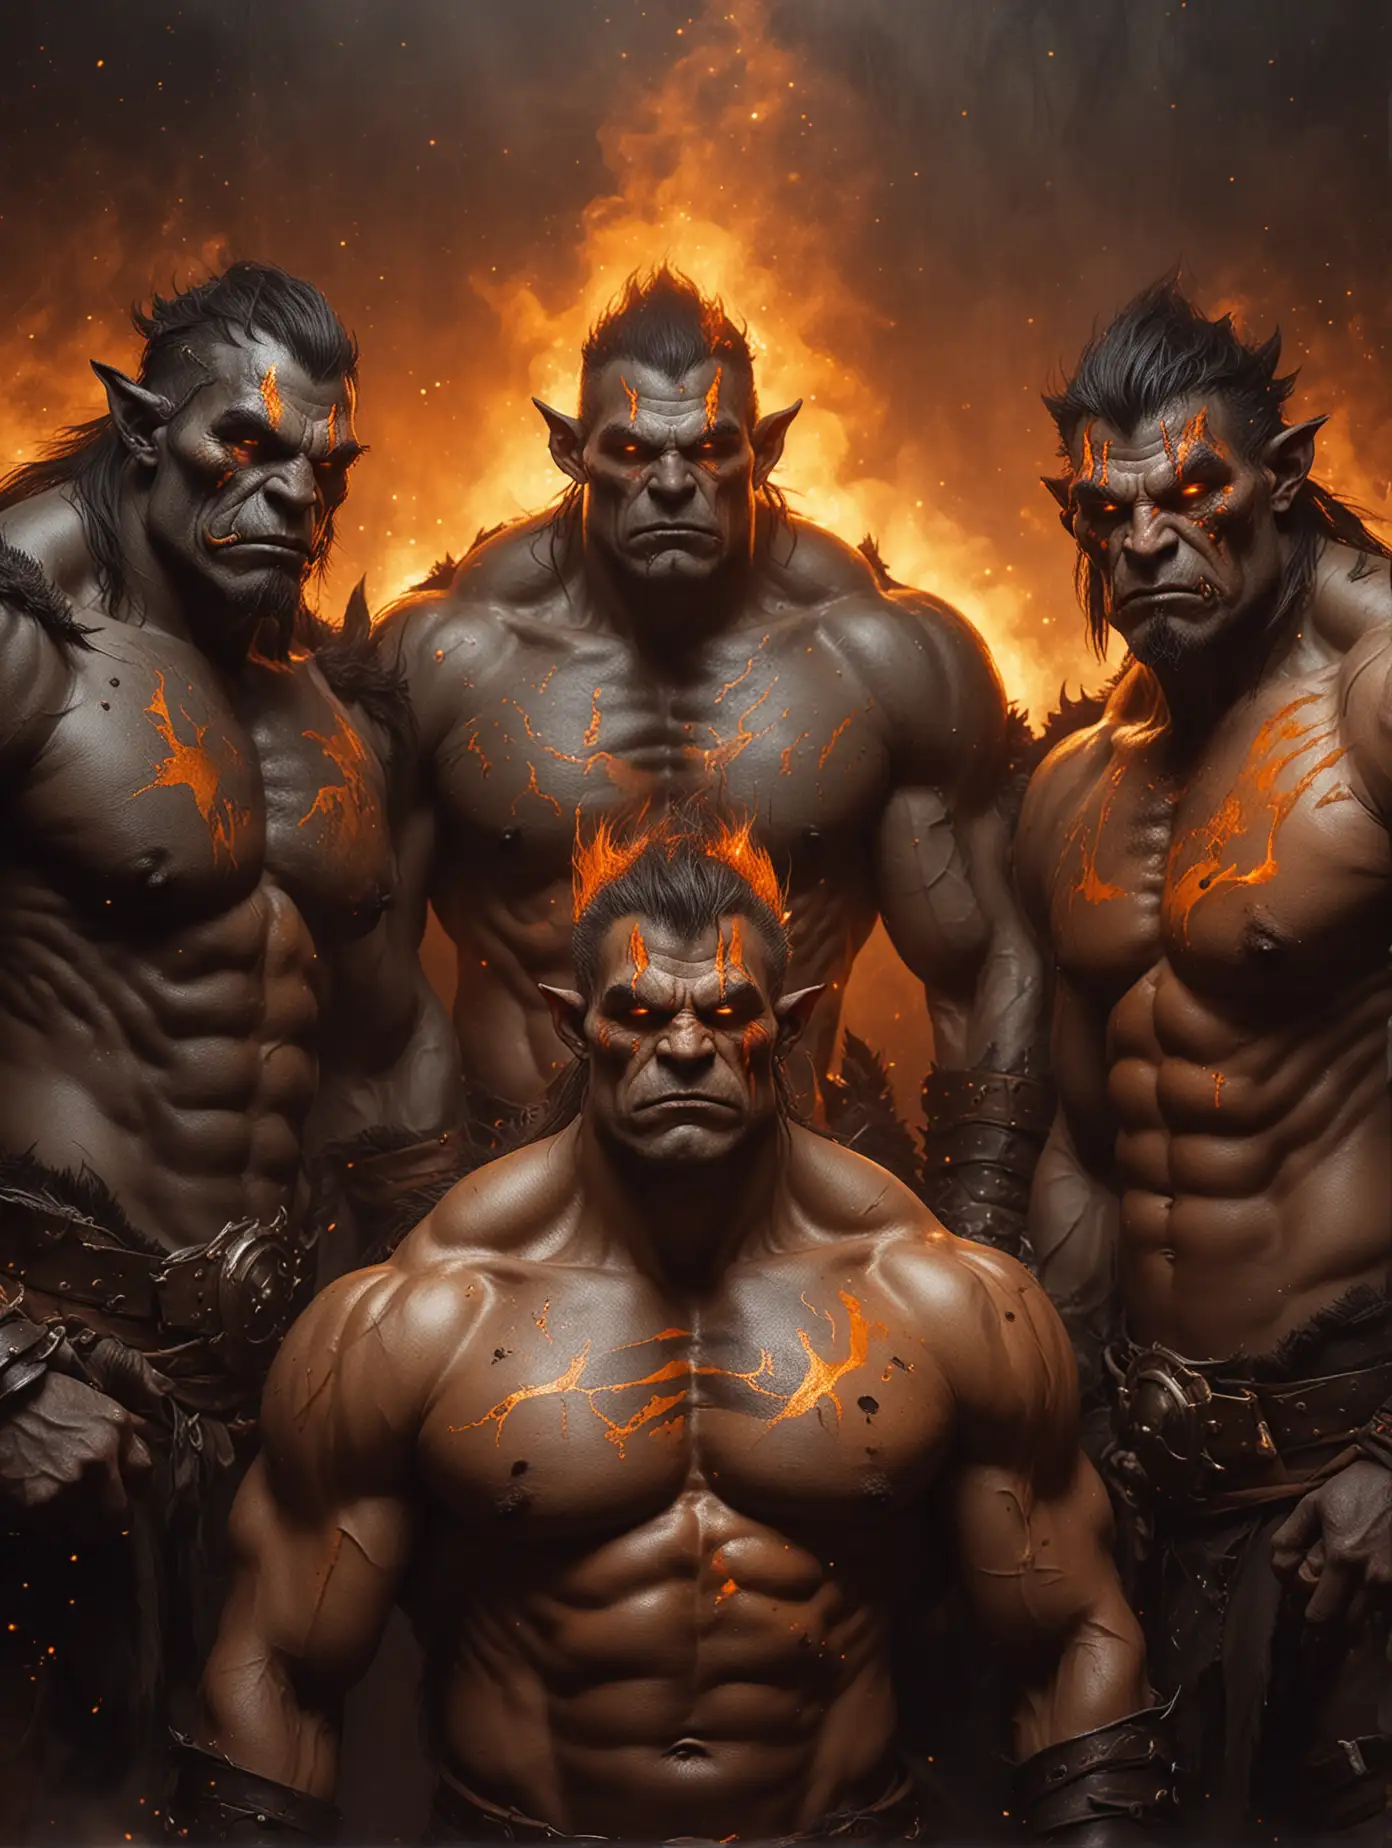 Four Muscular Shirtless Orc Men Surrounded by Fiery Orange Mist and Gold Sparks